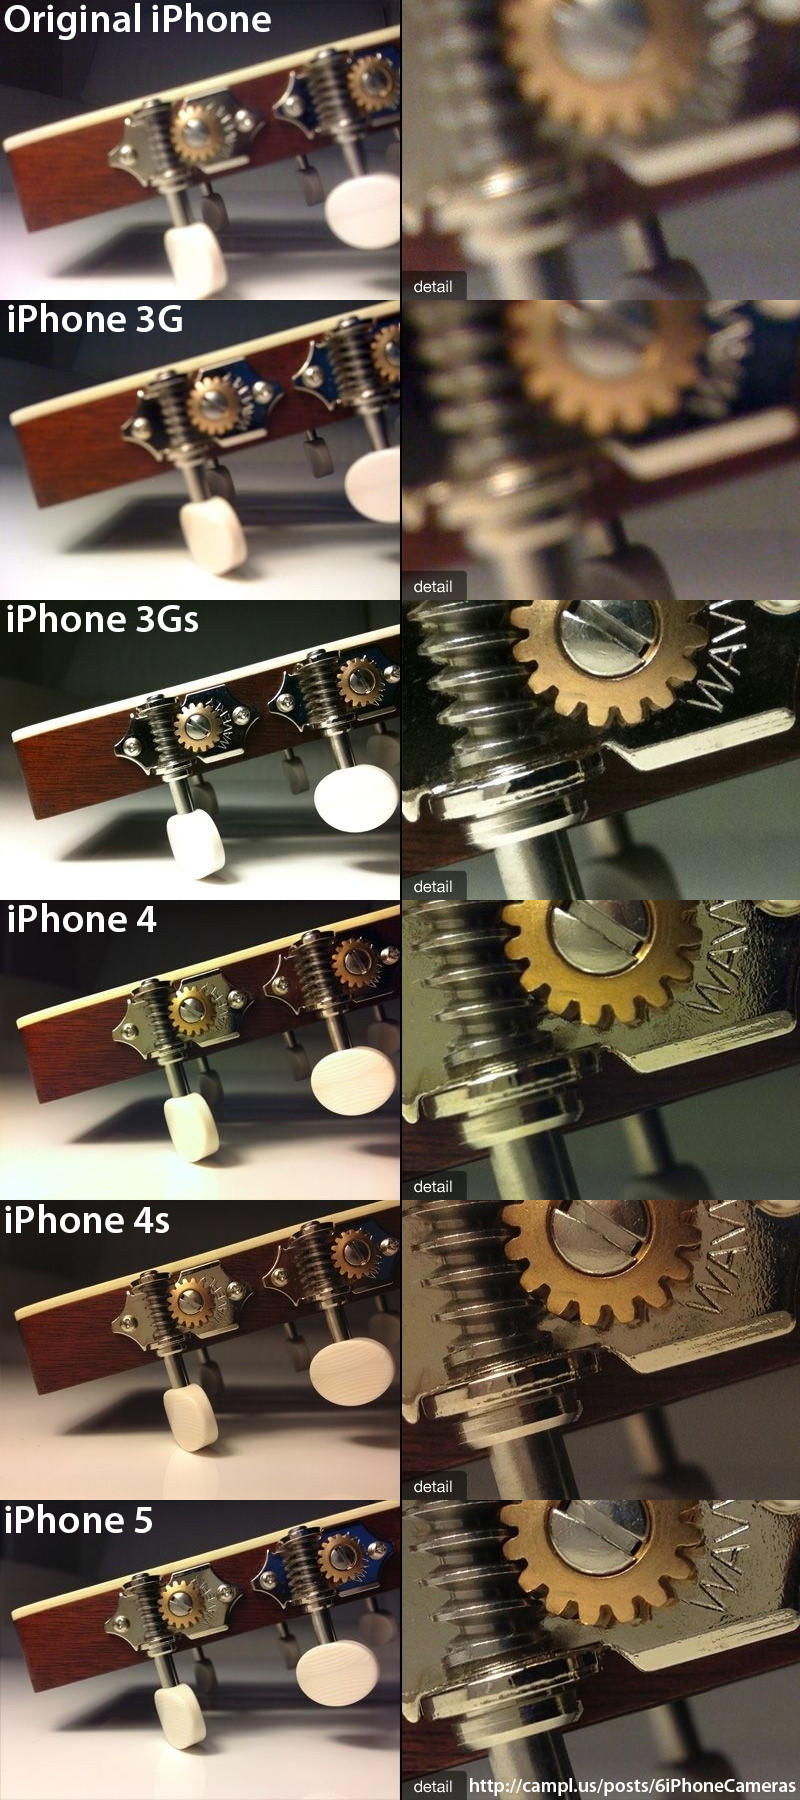 Photo Quality of All Six Generation iPhones Compared [Gallery]